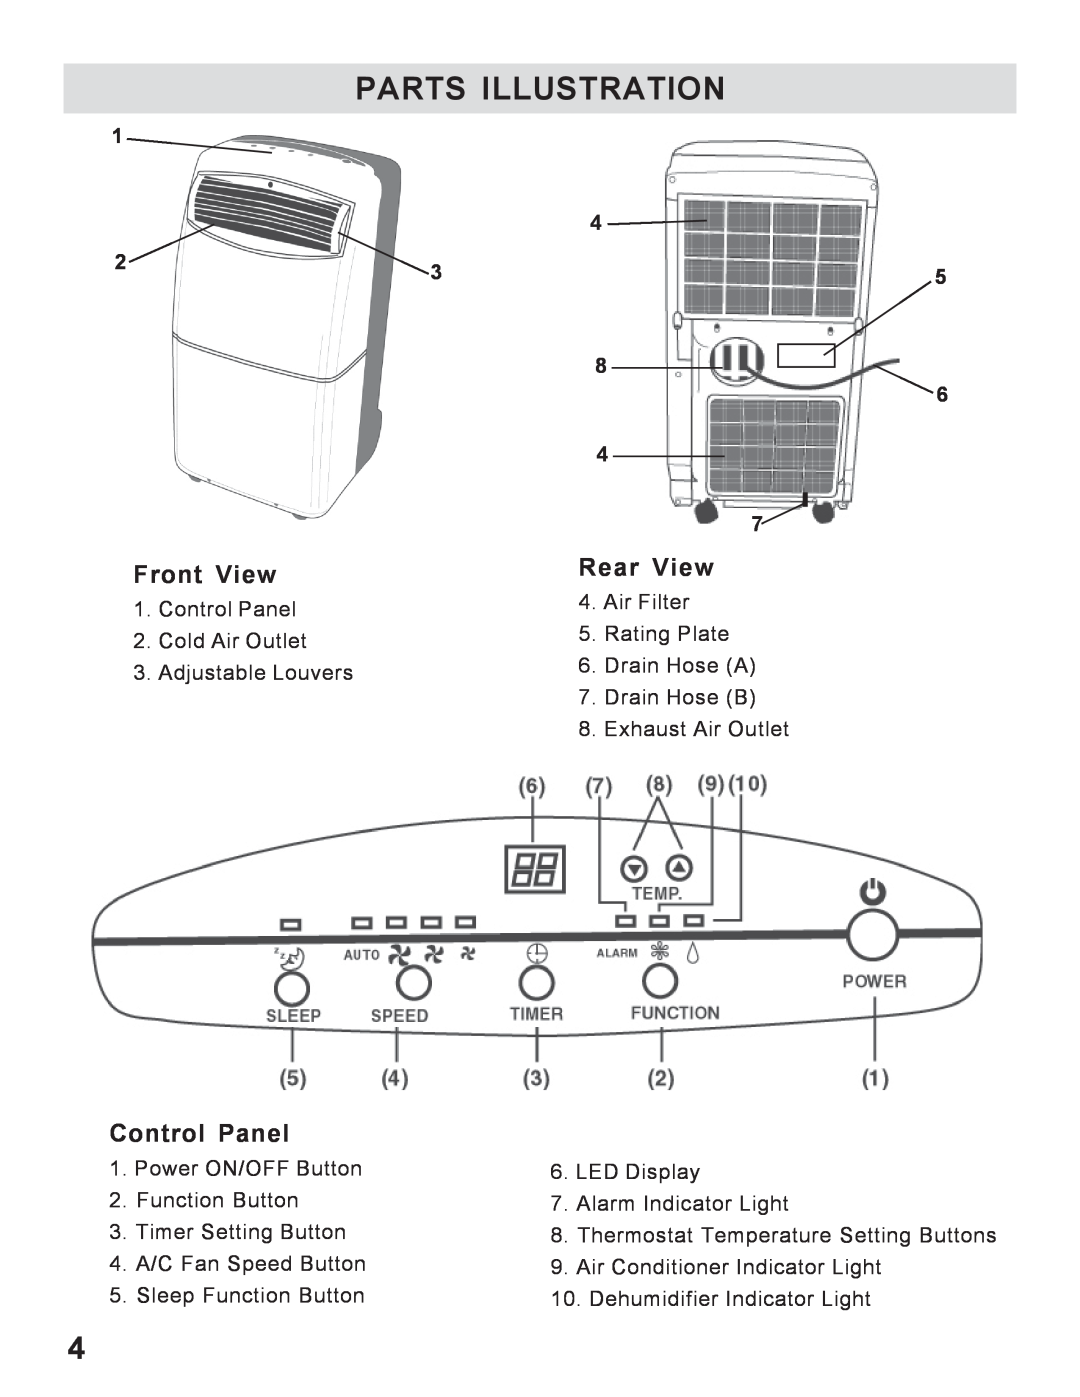 WindChaser Products PACR12 instruction manual Parts Illustration, Front View, Rear View, Control Panel 